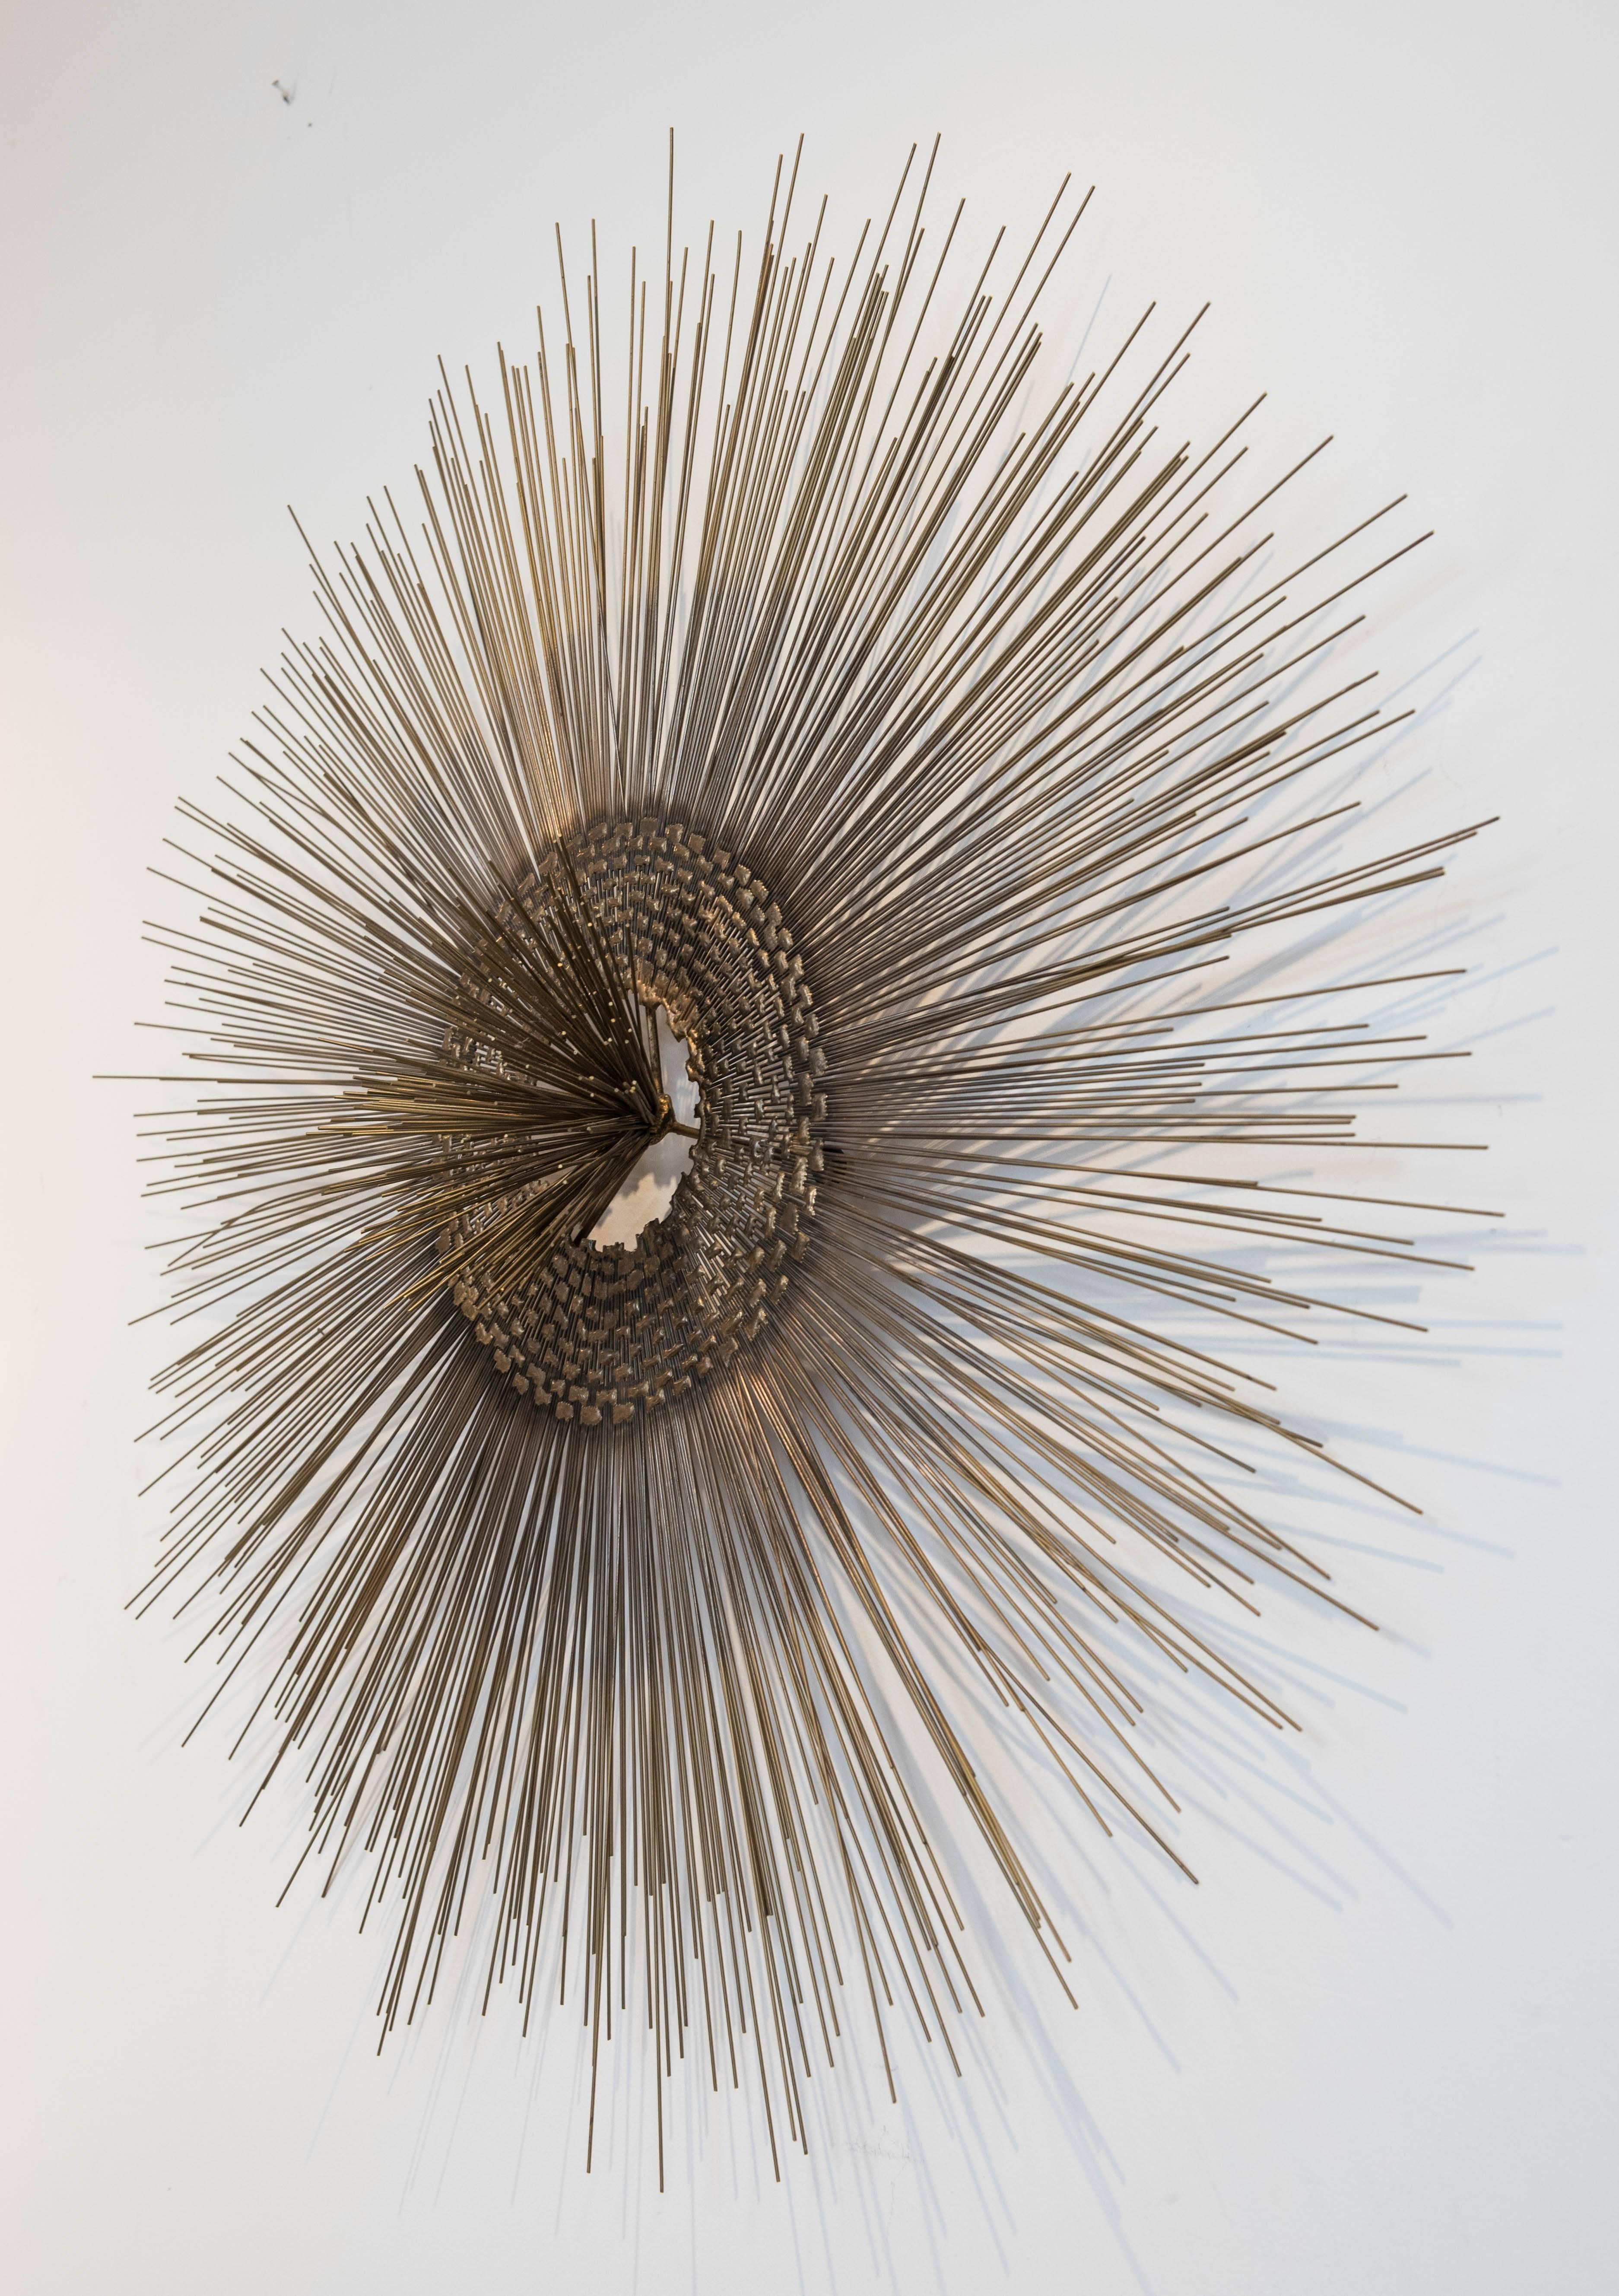 A splendid and Classic bronze-brass colored metal starburst wall sculpture with multiple metal rods surrounding a mesh interior with a metal rod 